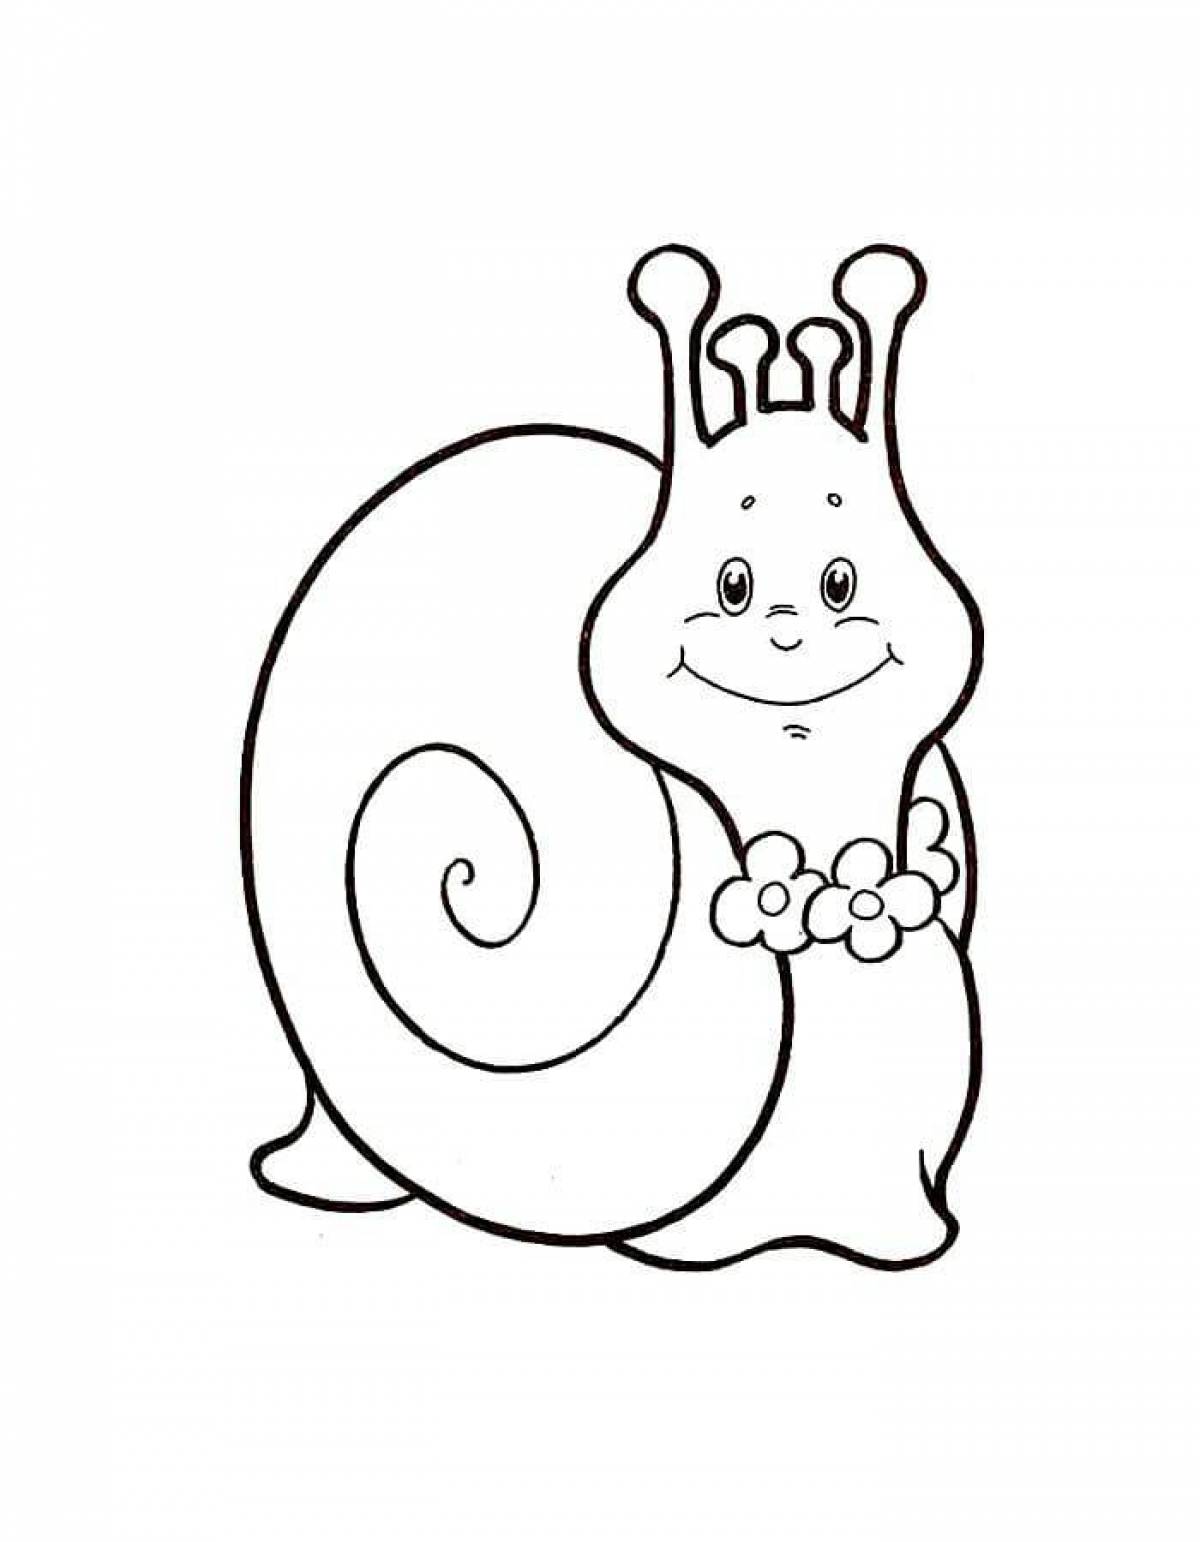 Animated snail coloring page for kids